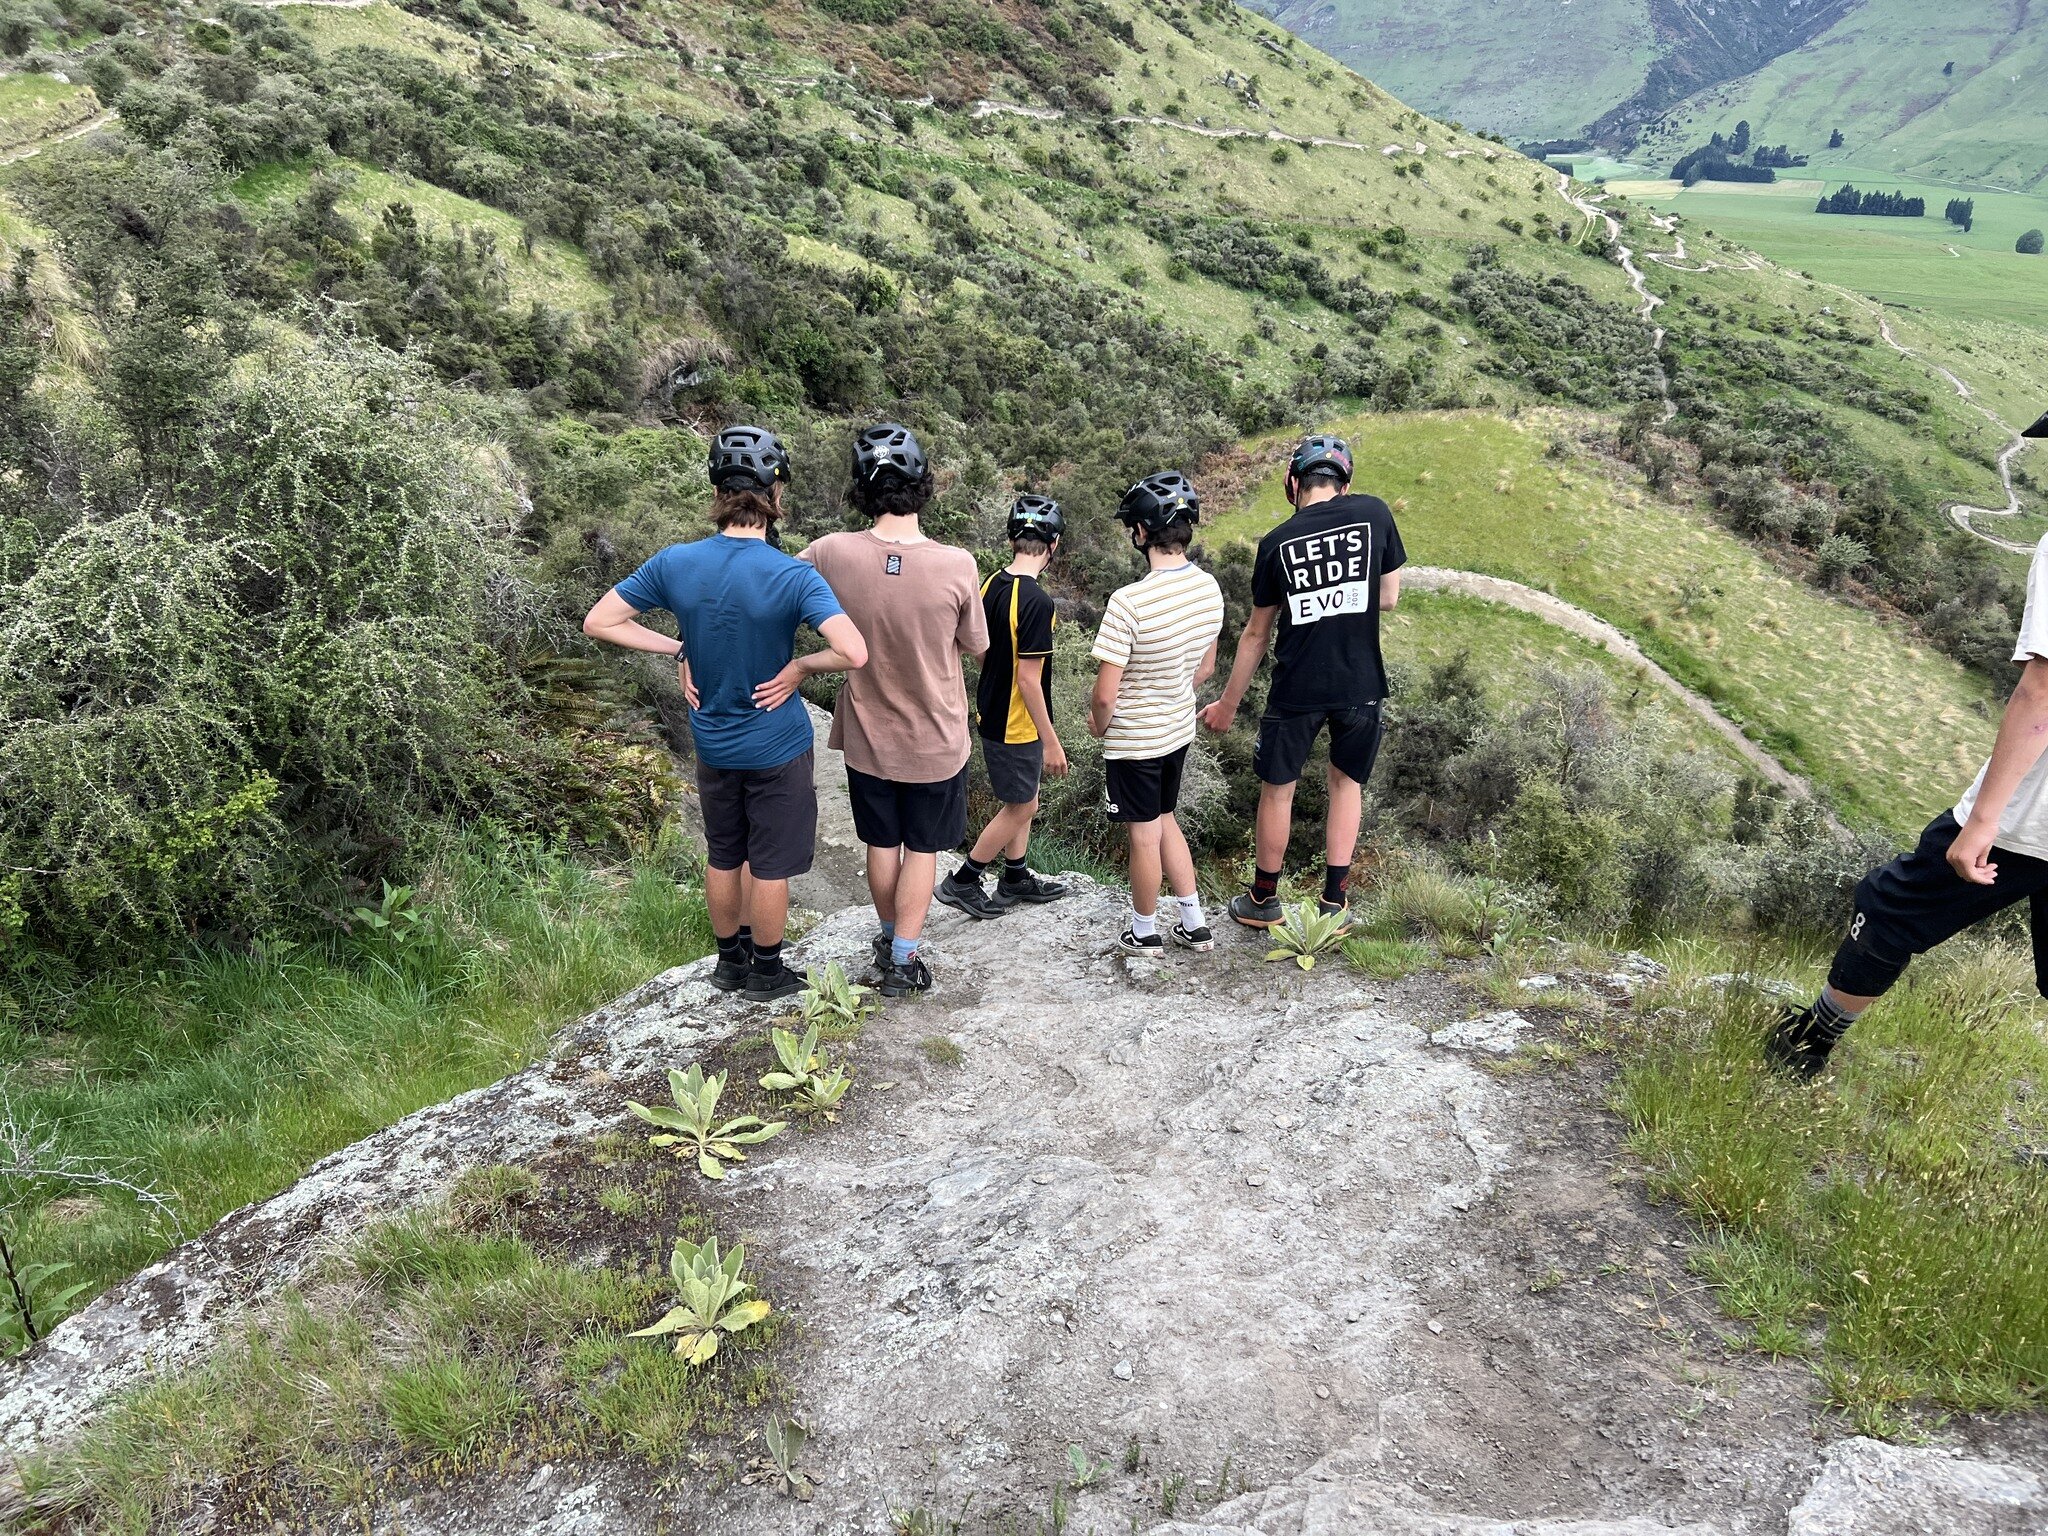 Yesterday our Wānaka teen boys smoothly picked their way down a @bikeglendhu grade 5 classic trail 'Dark Matter'. It was the first time down this trail for a few of them, and they absolutely smashed it!

It's awesome to see how the culture within thi